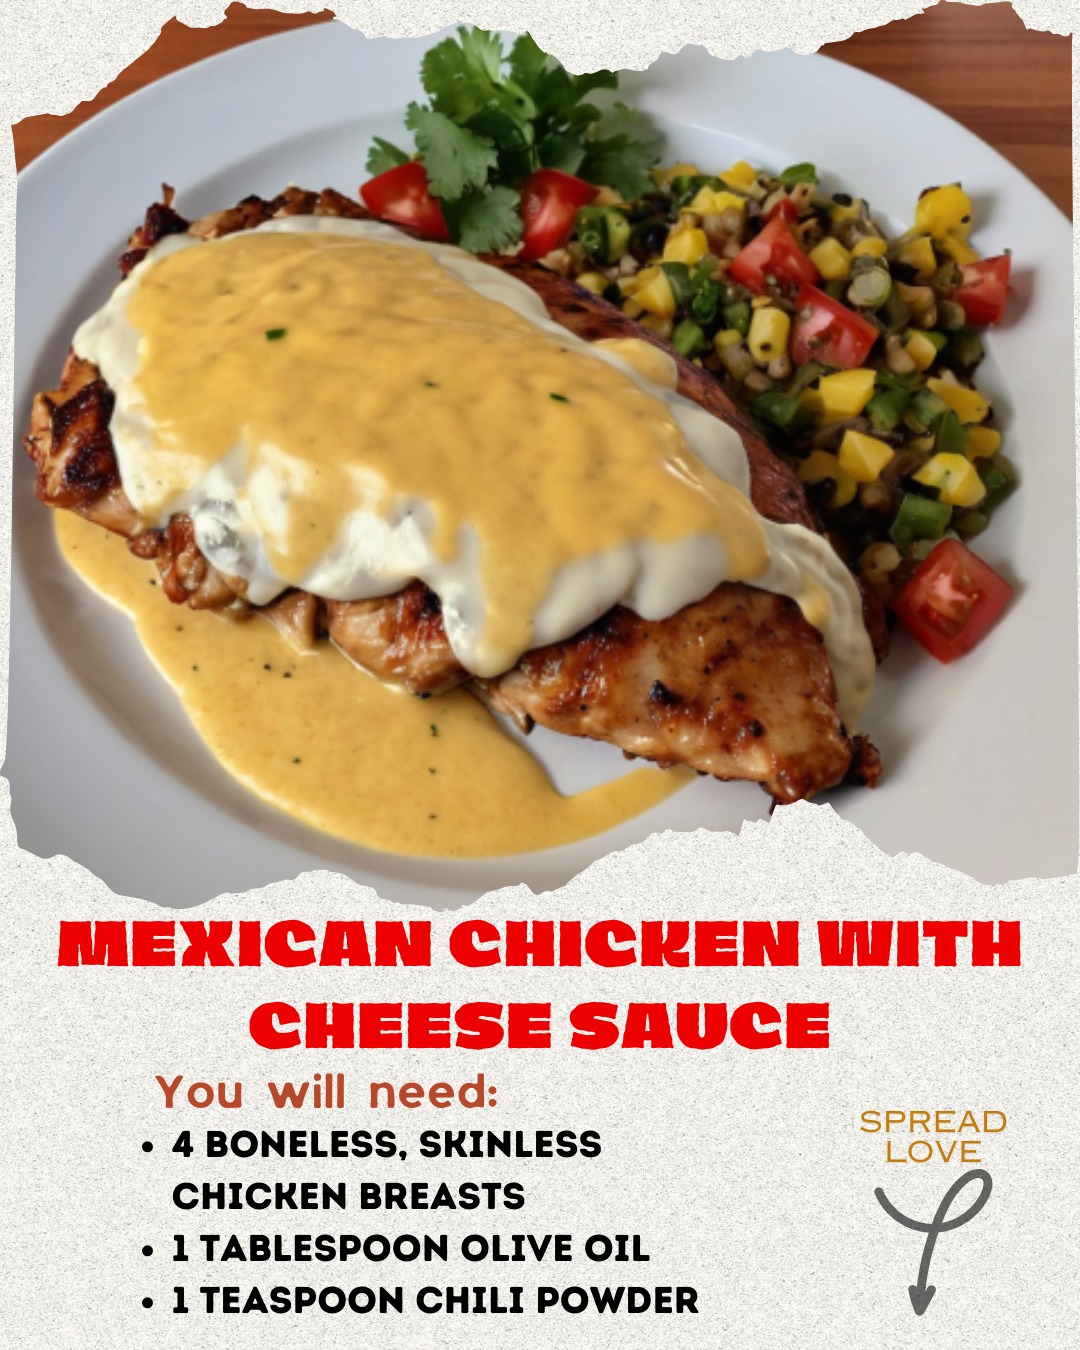 Mexican_Chicken_with_Cheese_Sauce.jpg